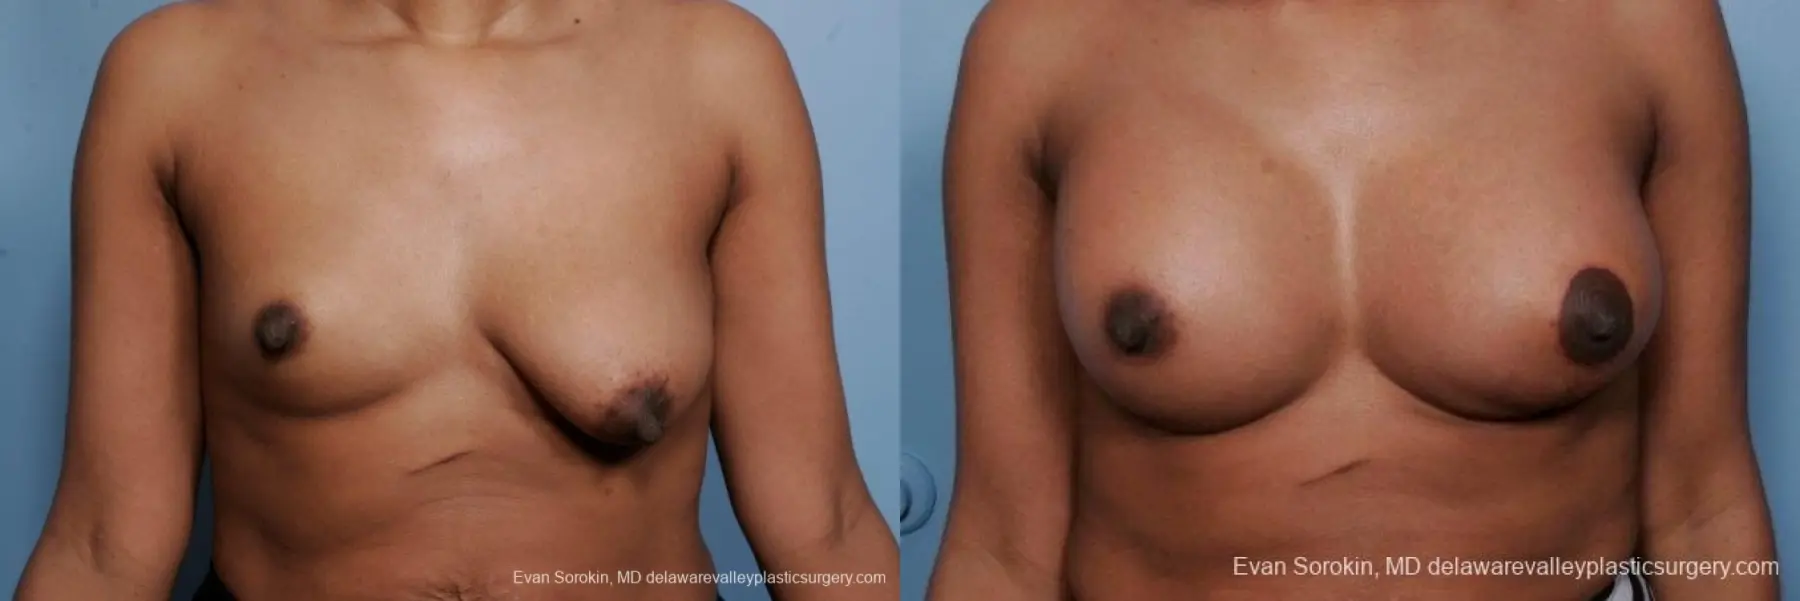 Philadelphia Breast Lift and Augmentation 8689 - Before and After 1